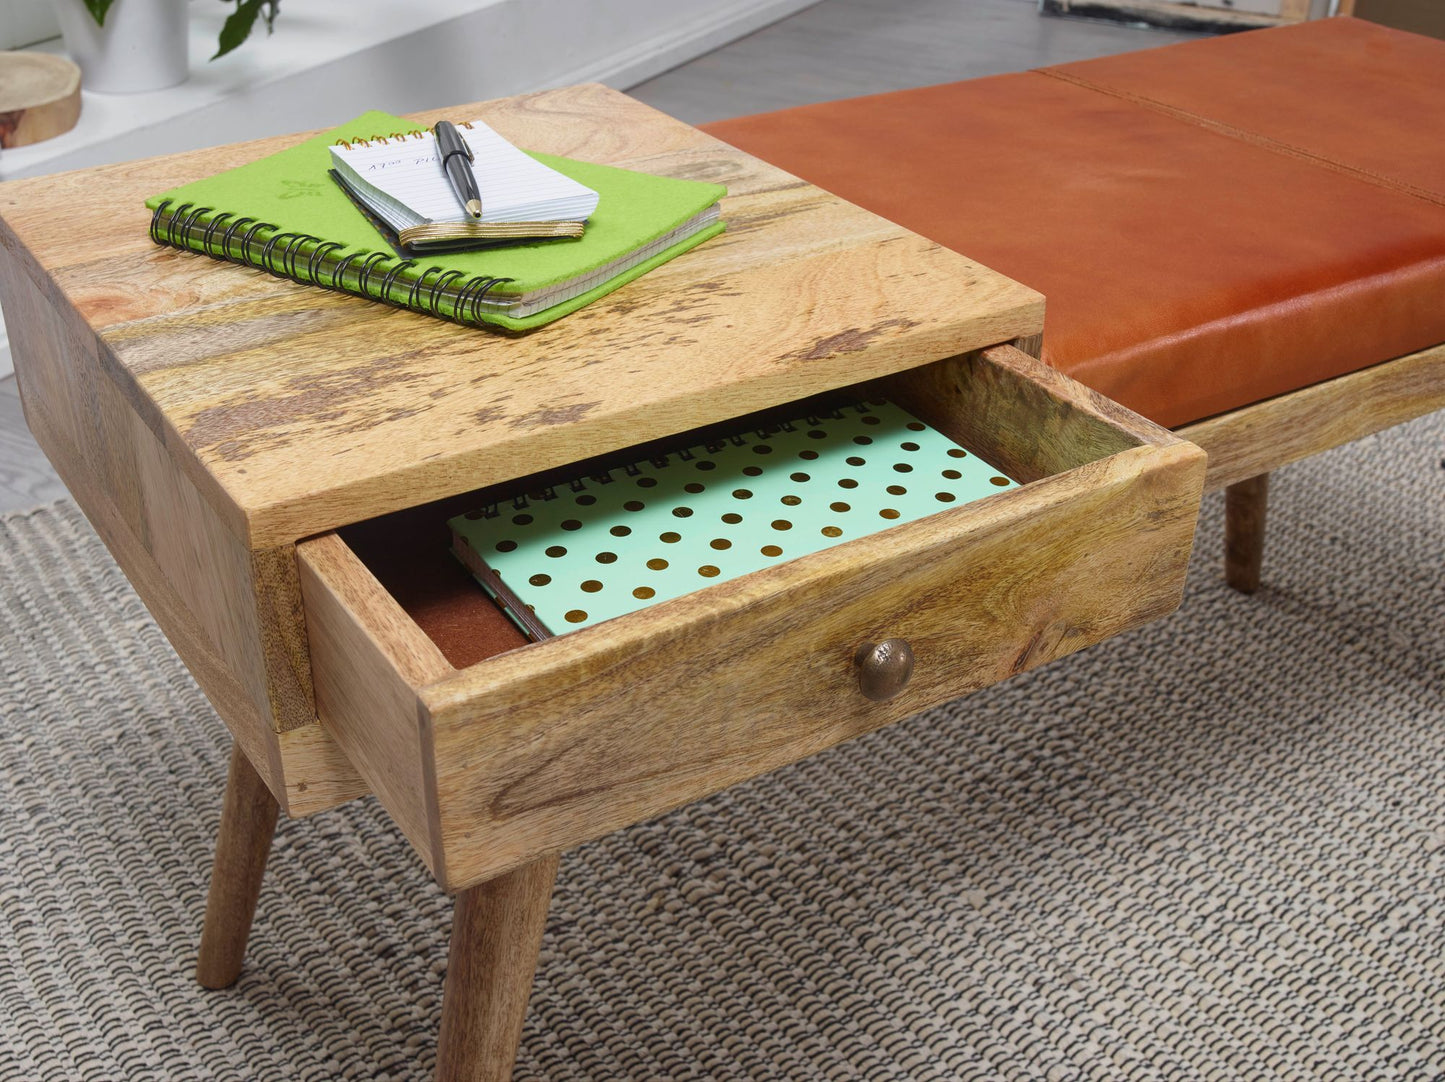 Laon Mango Wood Bench With One Drawer